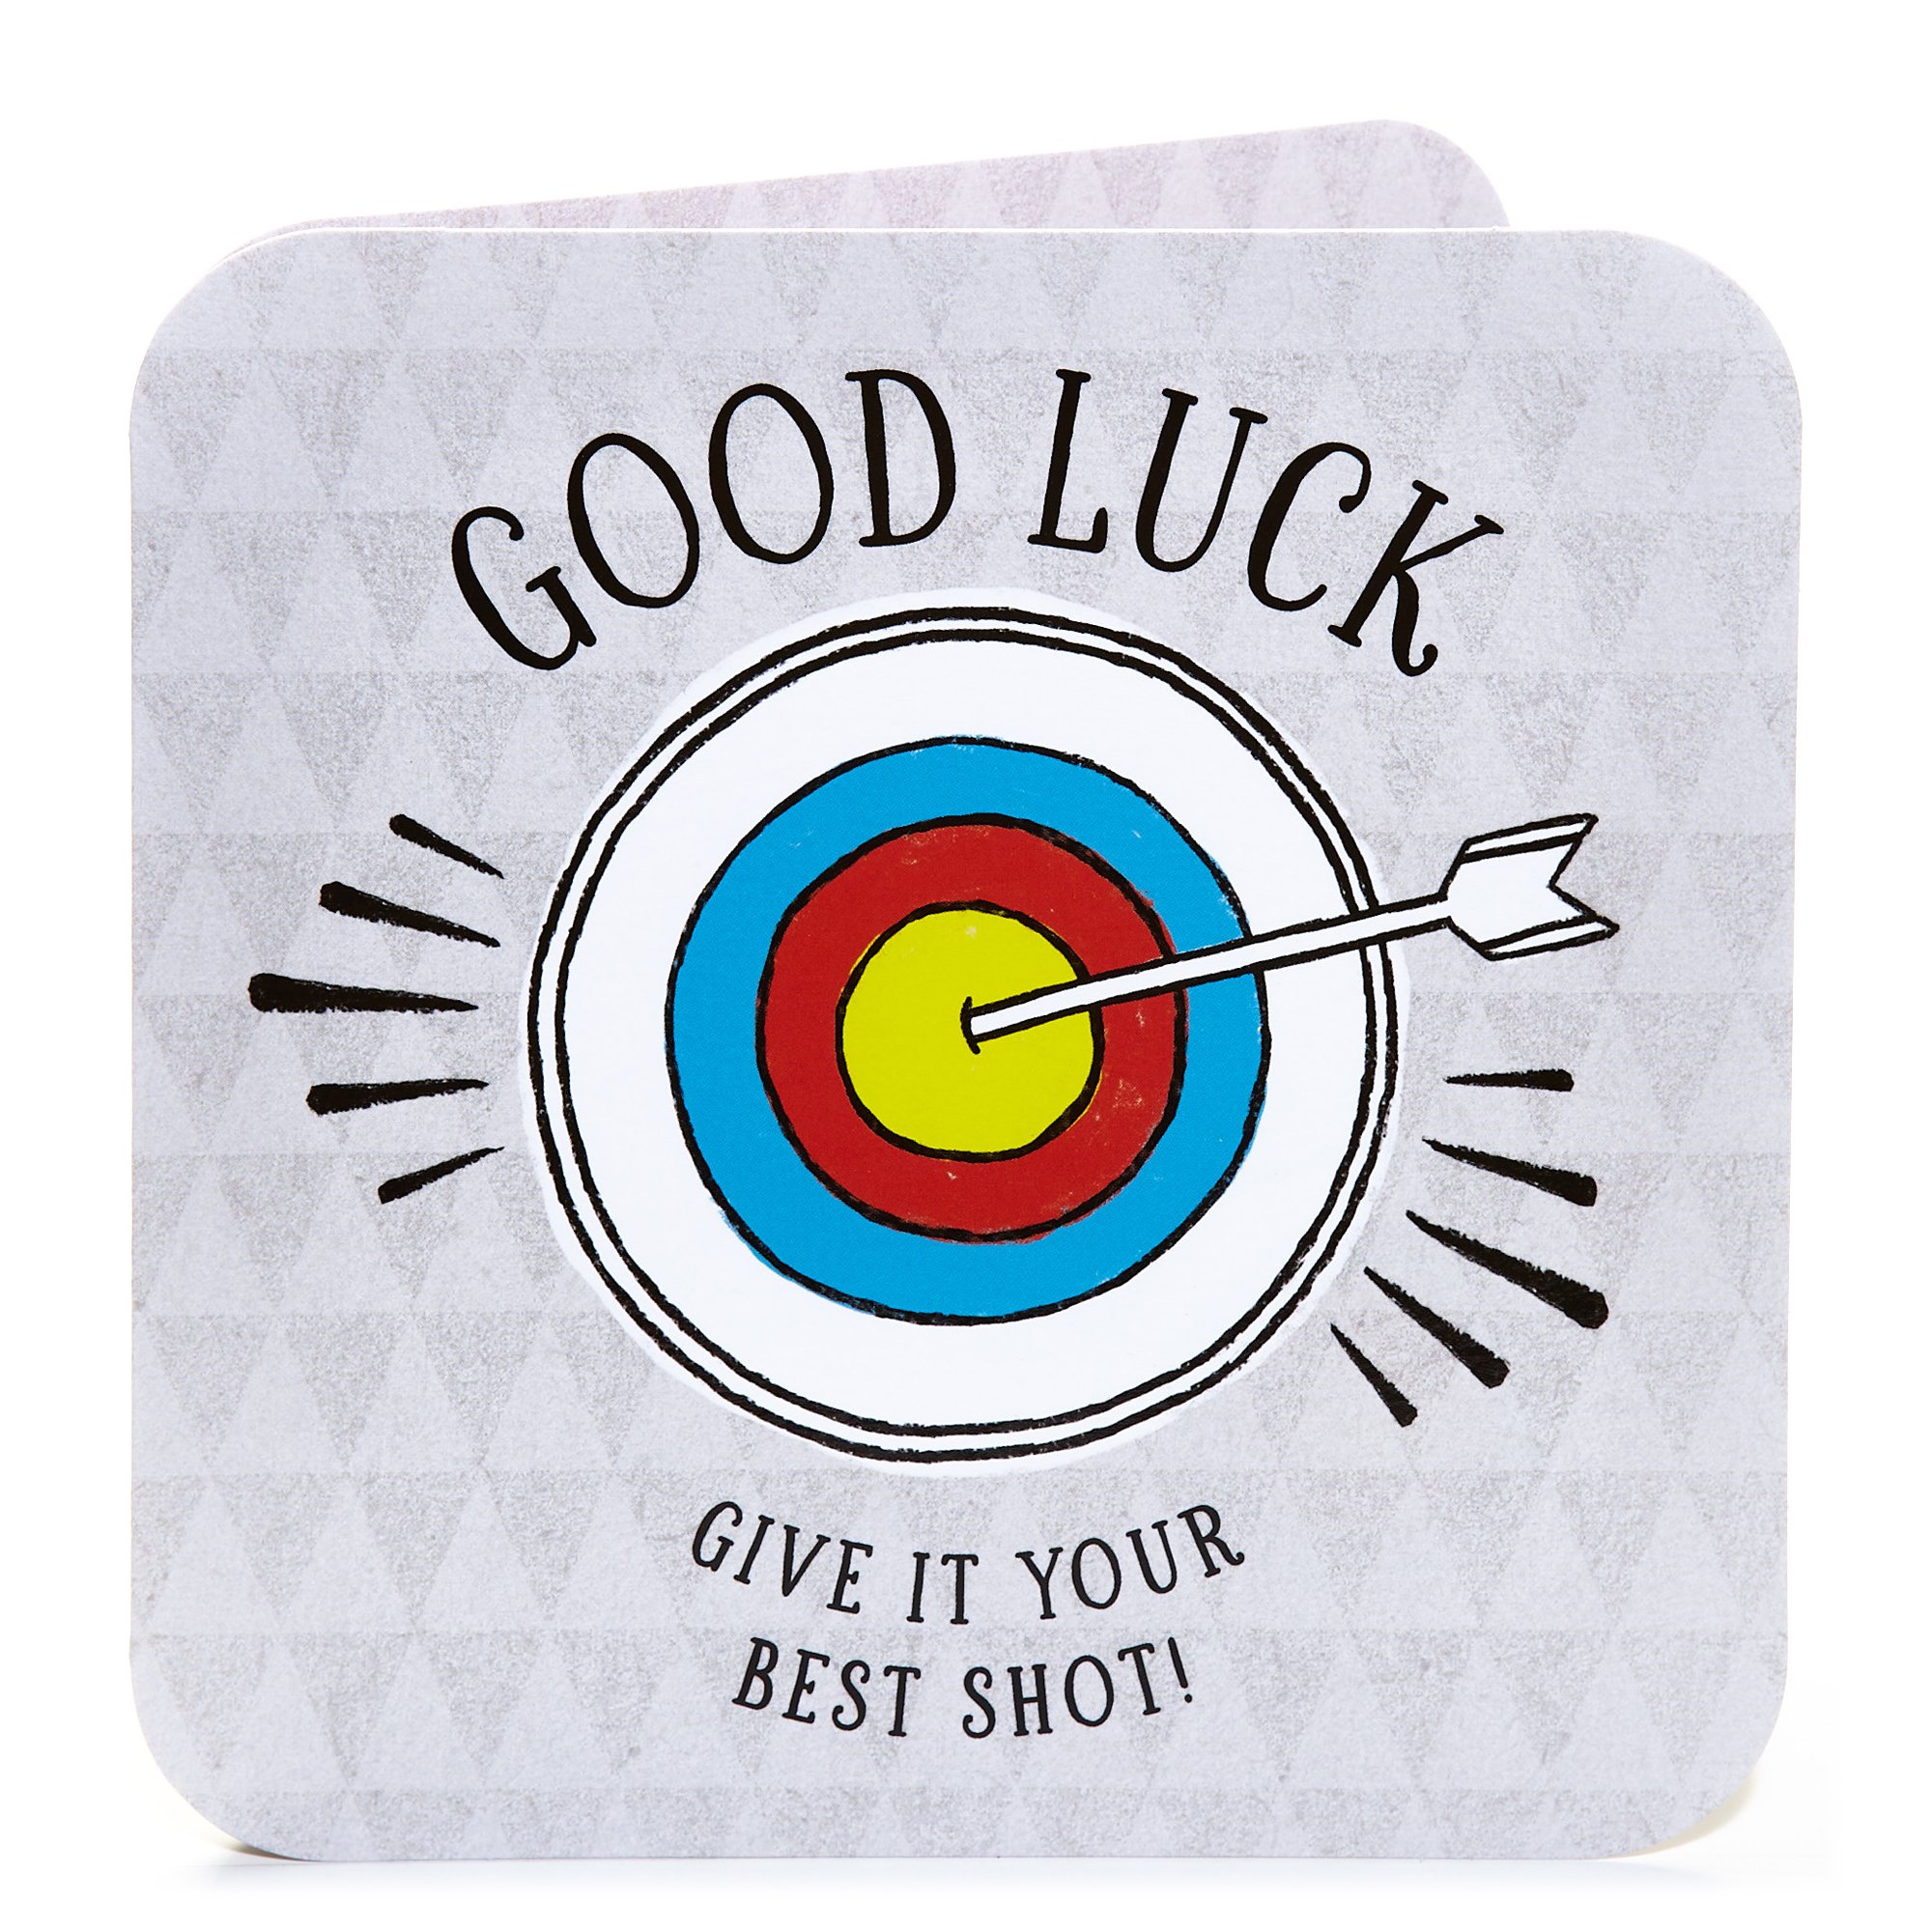 Good Luck Card - Give It Your Best Shot